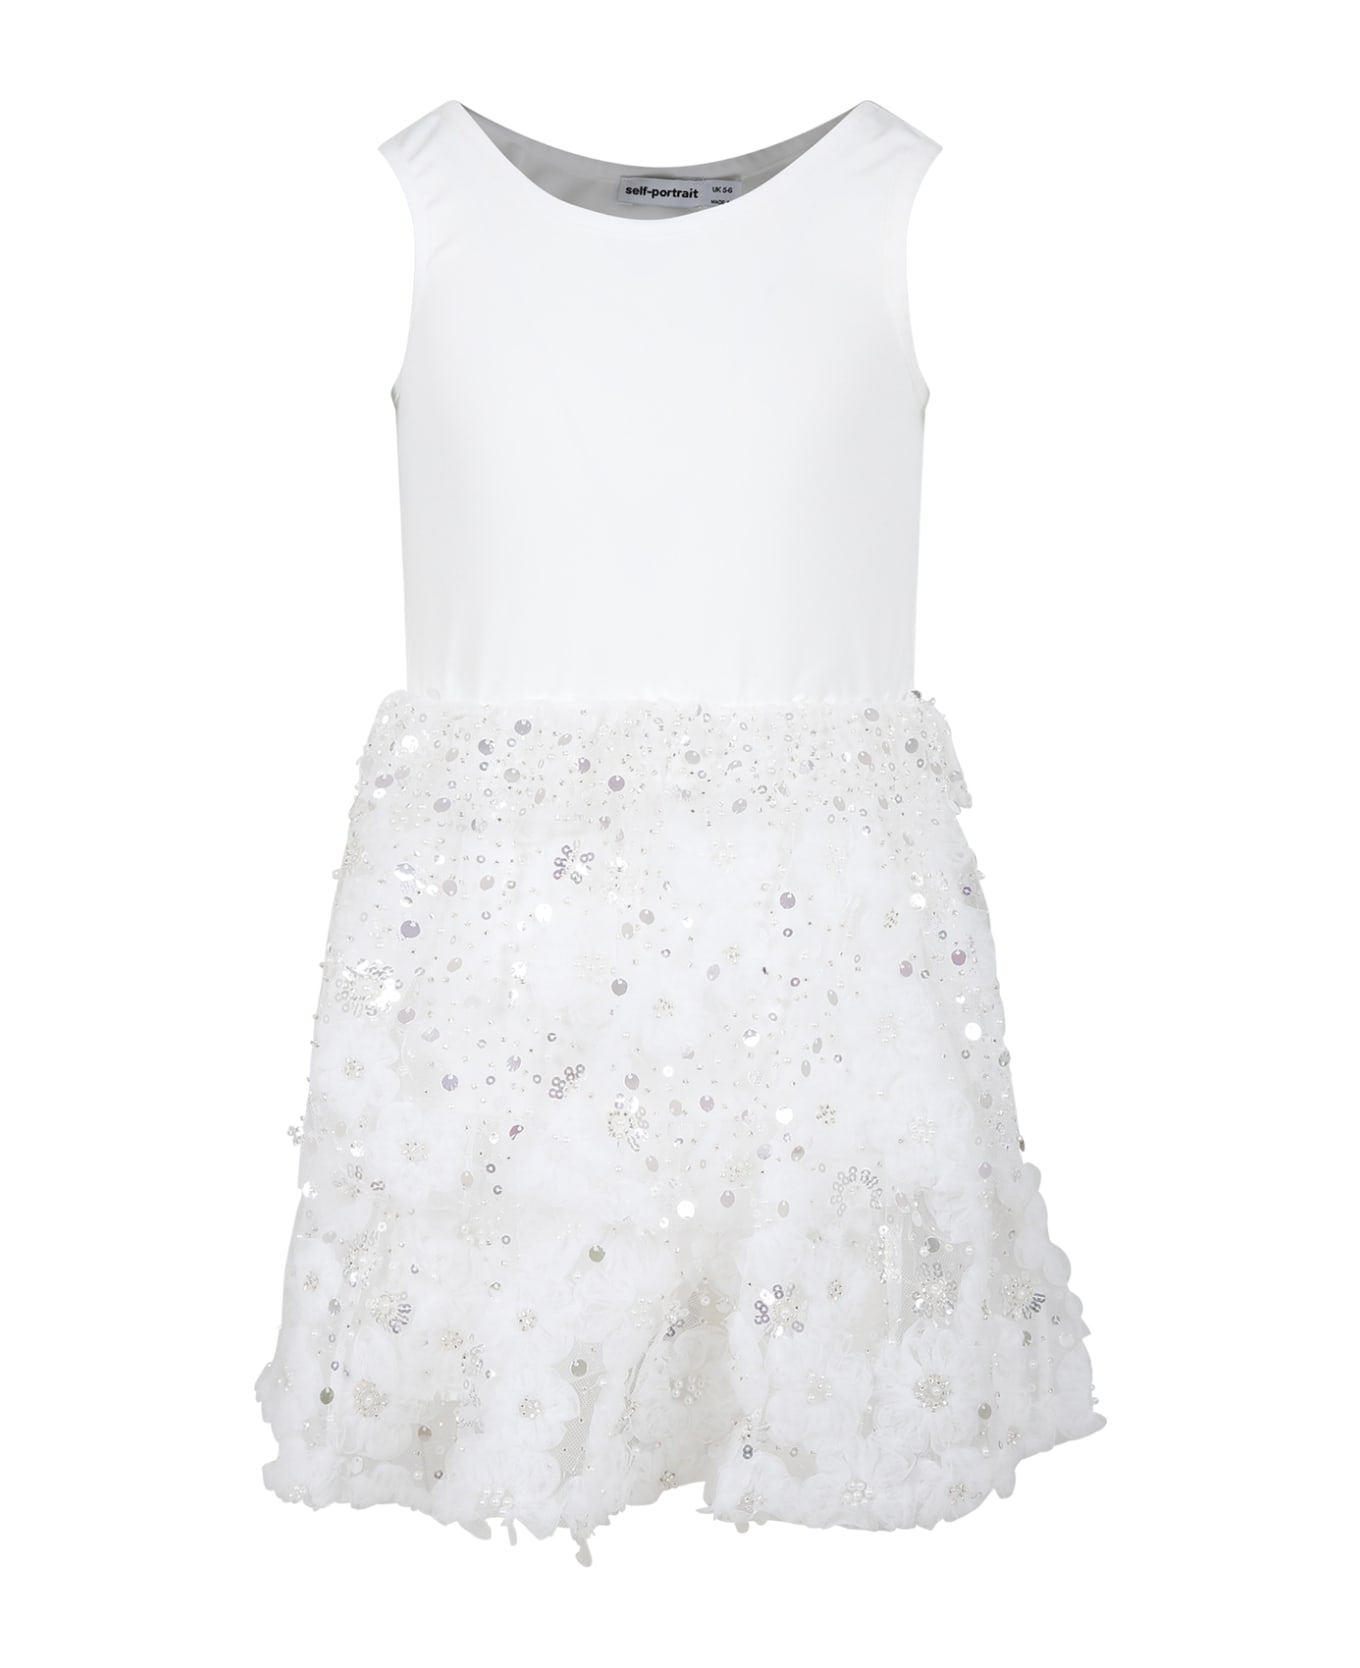 self-portrait White Dress For Girl With Flowers - White